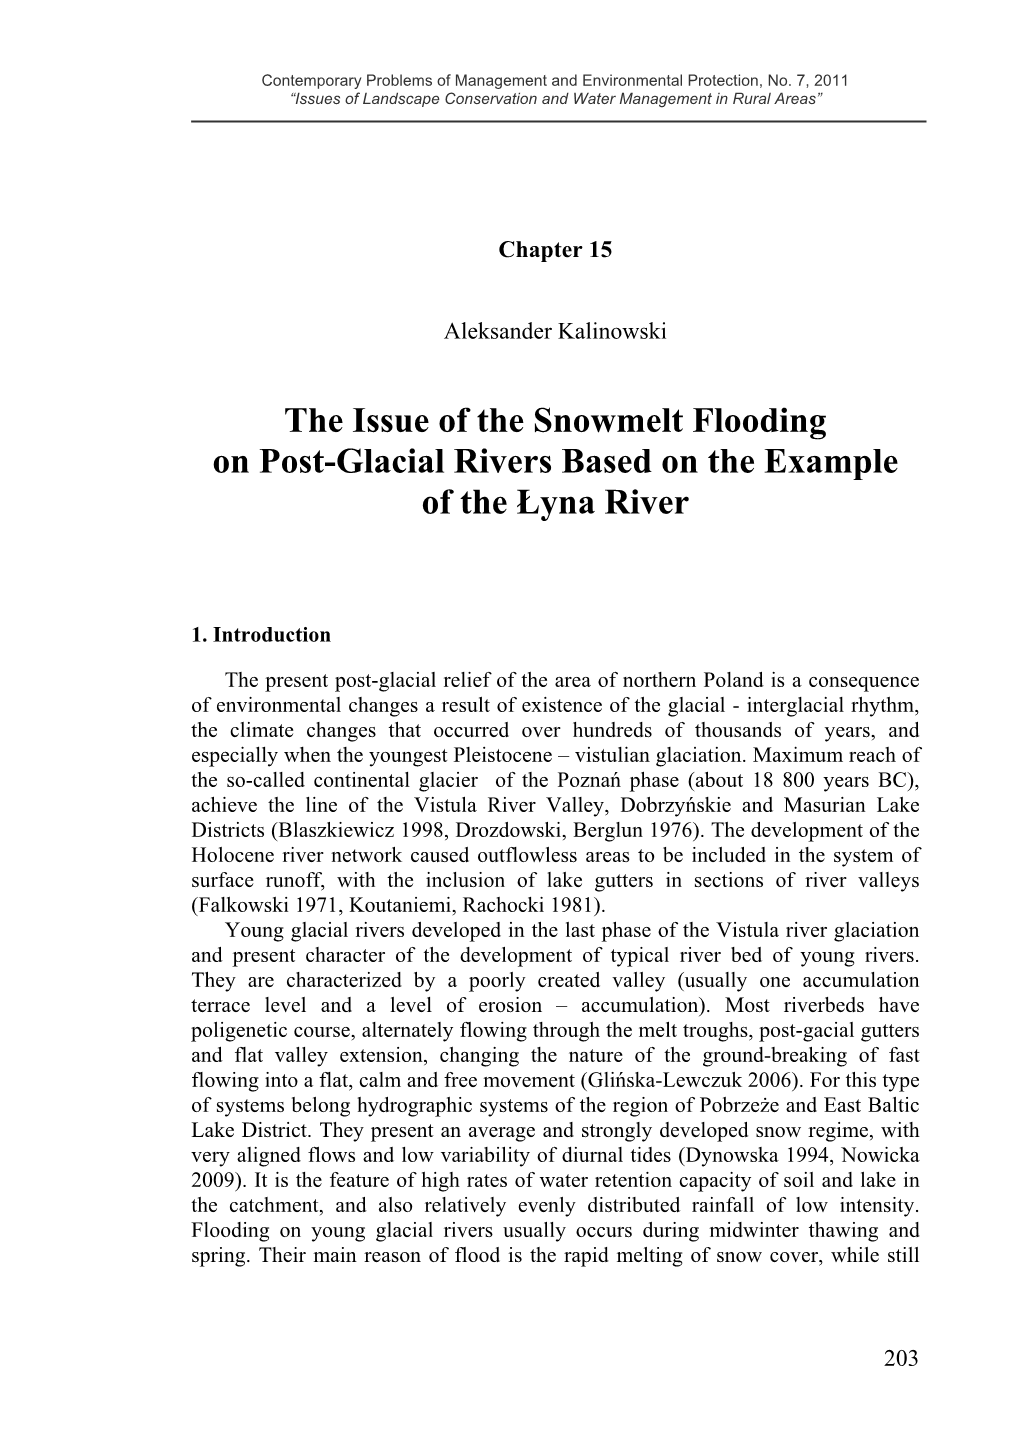 The Issue of the Snowmelt Flooding on Post-Glacial Rivers Based on the Example of the Łyna River